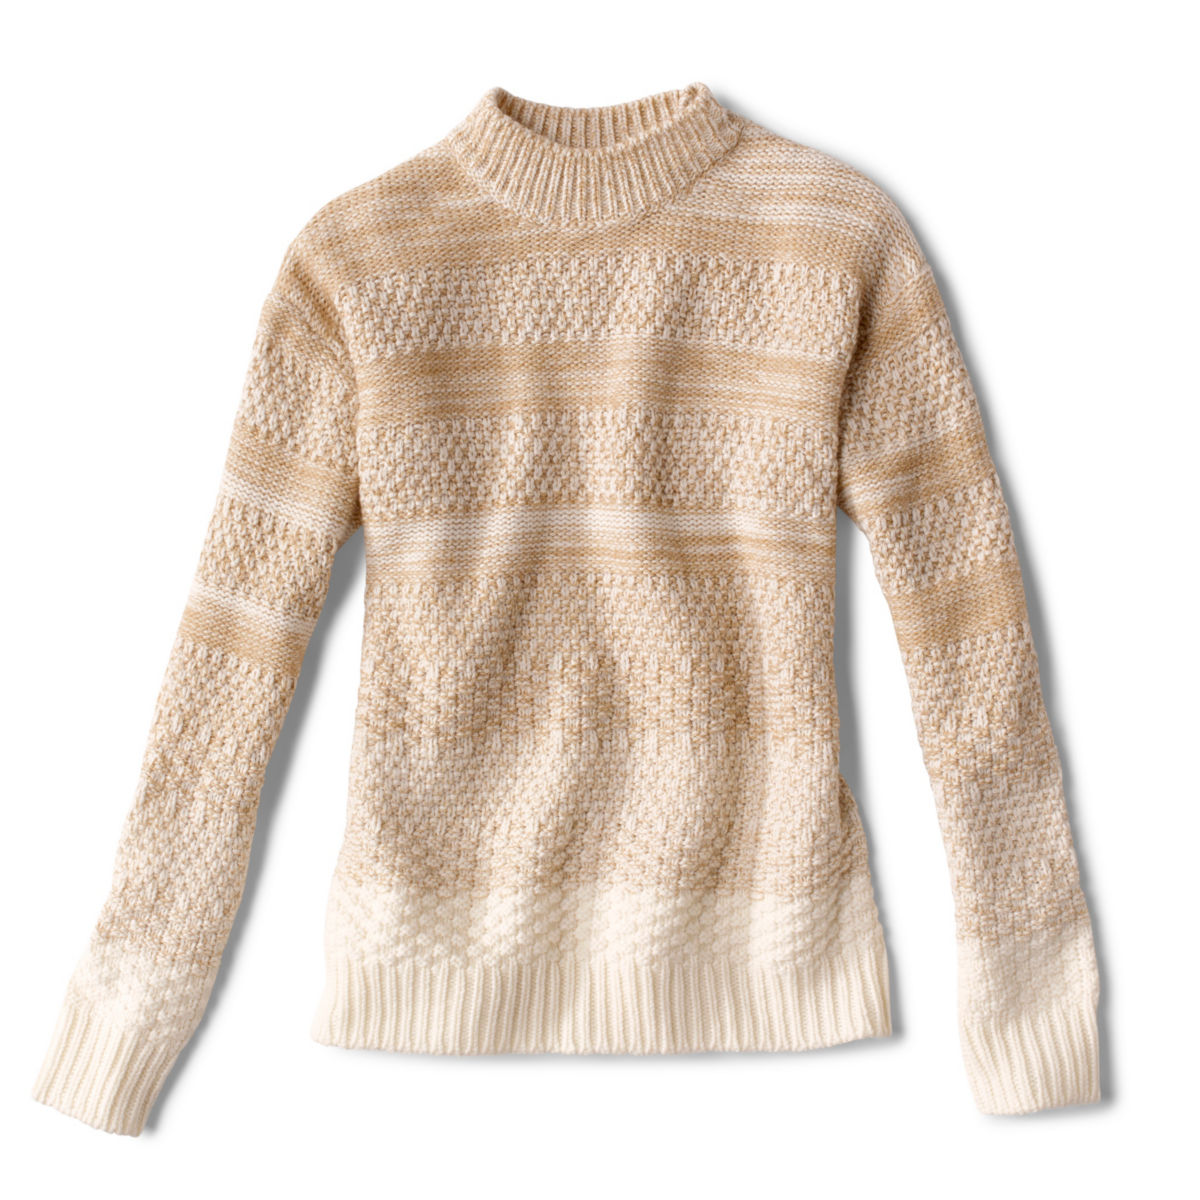 Ombré Mixed Stitch Sweater - CREAM MULTIimage number 0